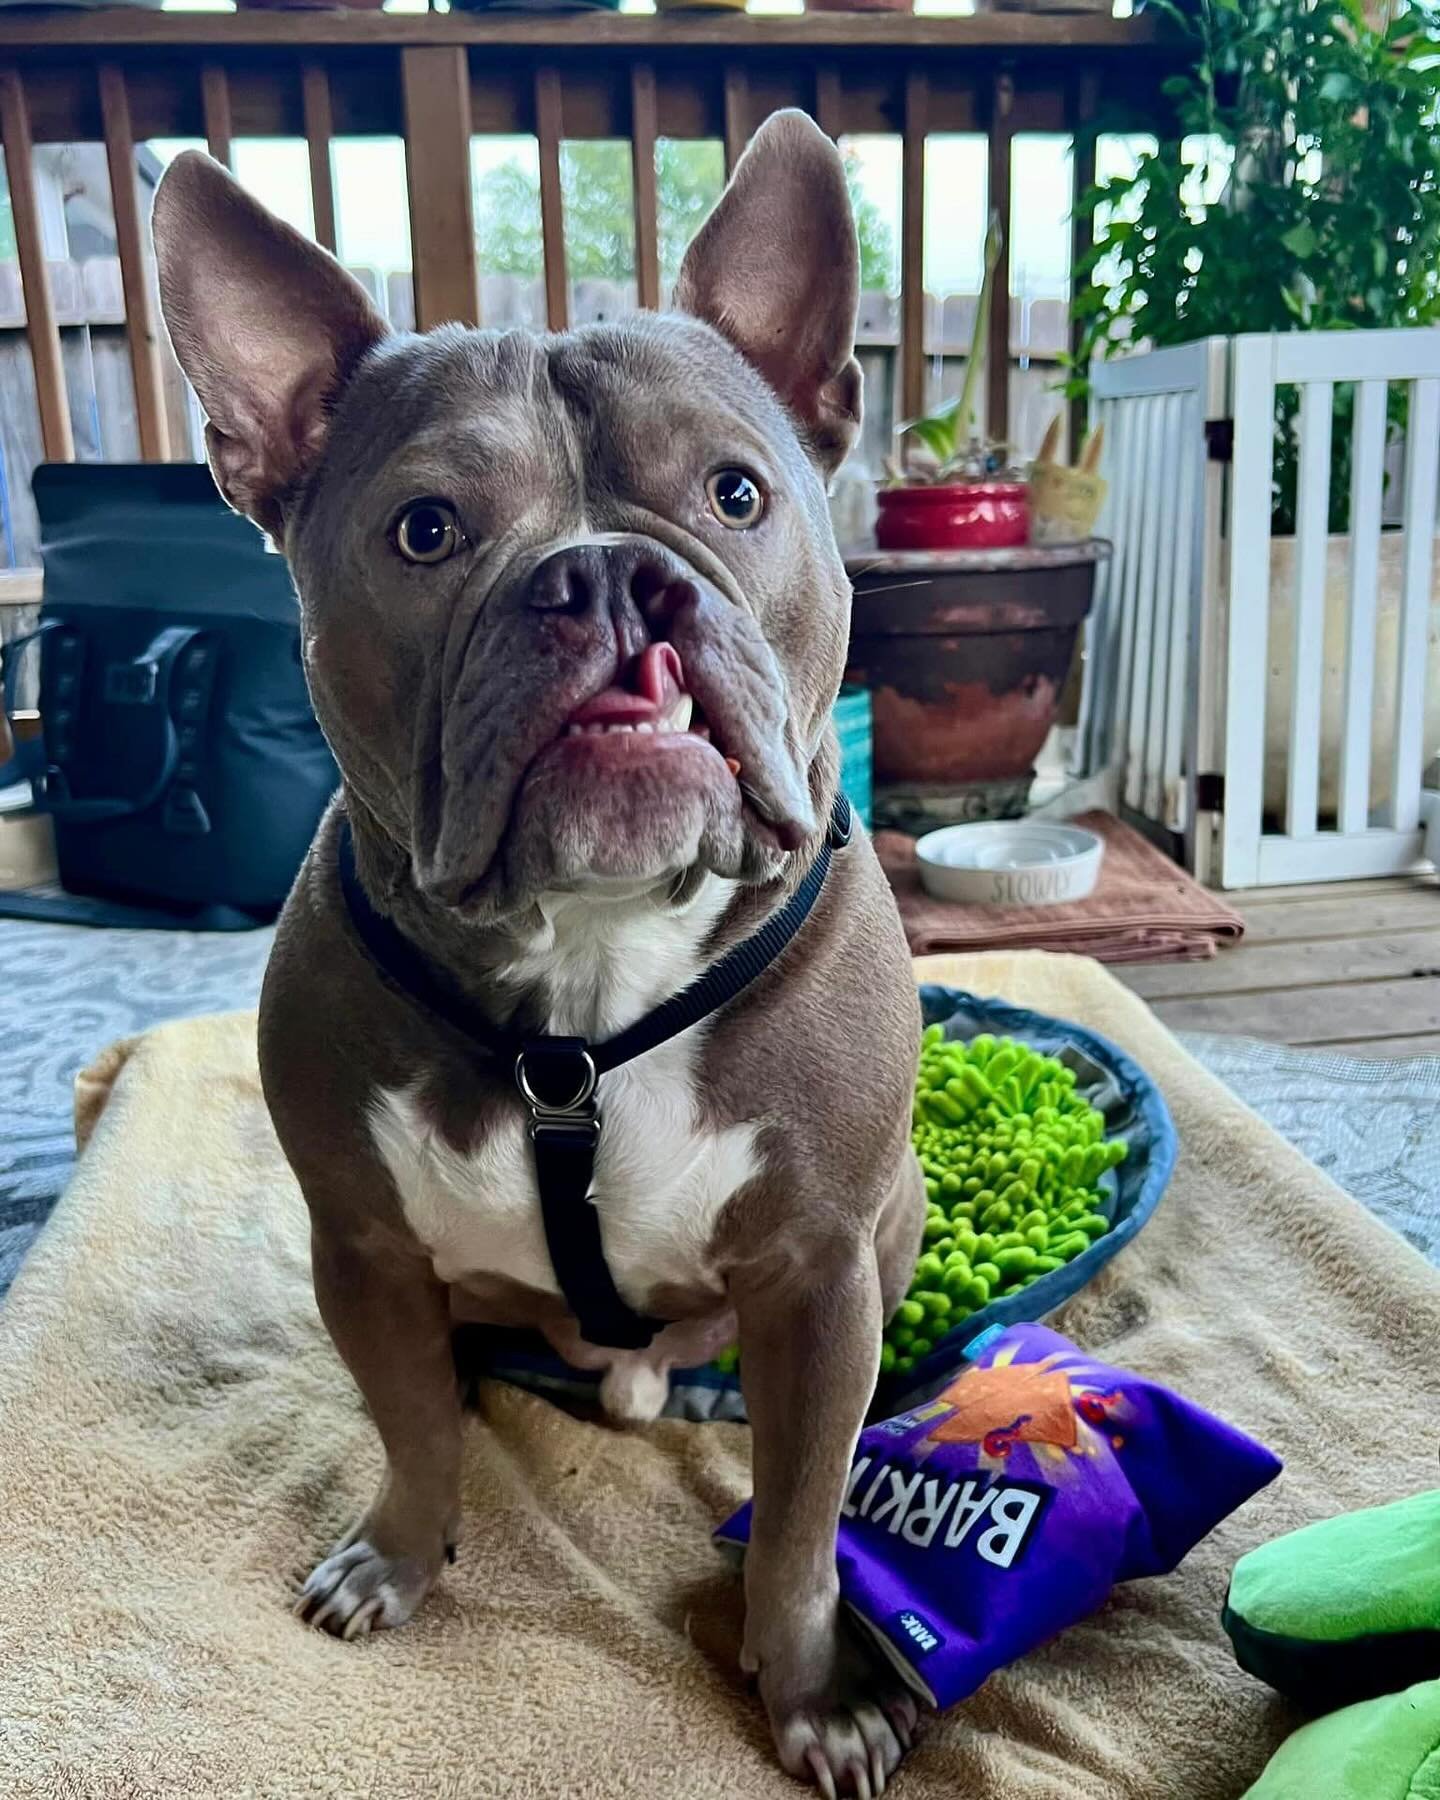 Happy 4th Birthday, Bugsy!!! 🥳🕺🏼❤️

Bugsy&rsquo;s family shared these celebration pics along with a really touching update and we wanted to share here too because this birthday celebration is a very big deal. 

In the update, mom notes that this t